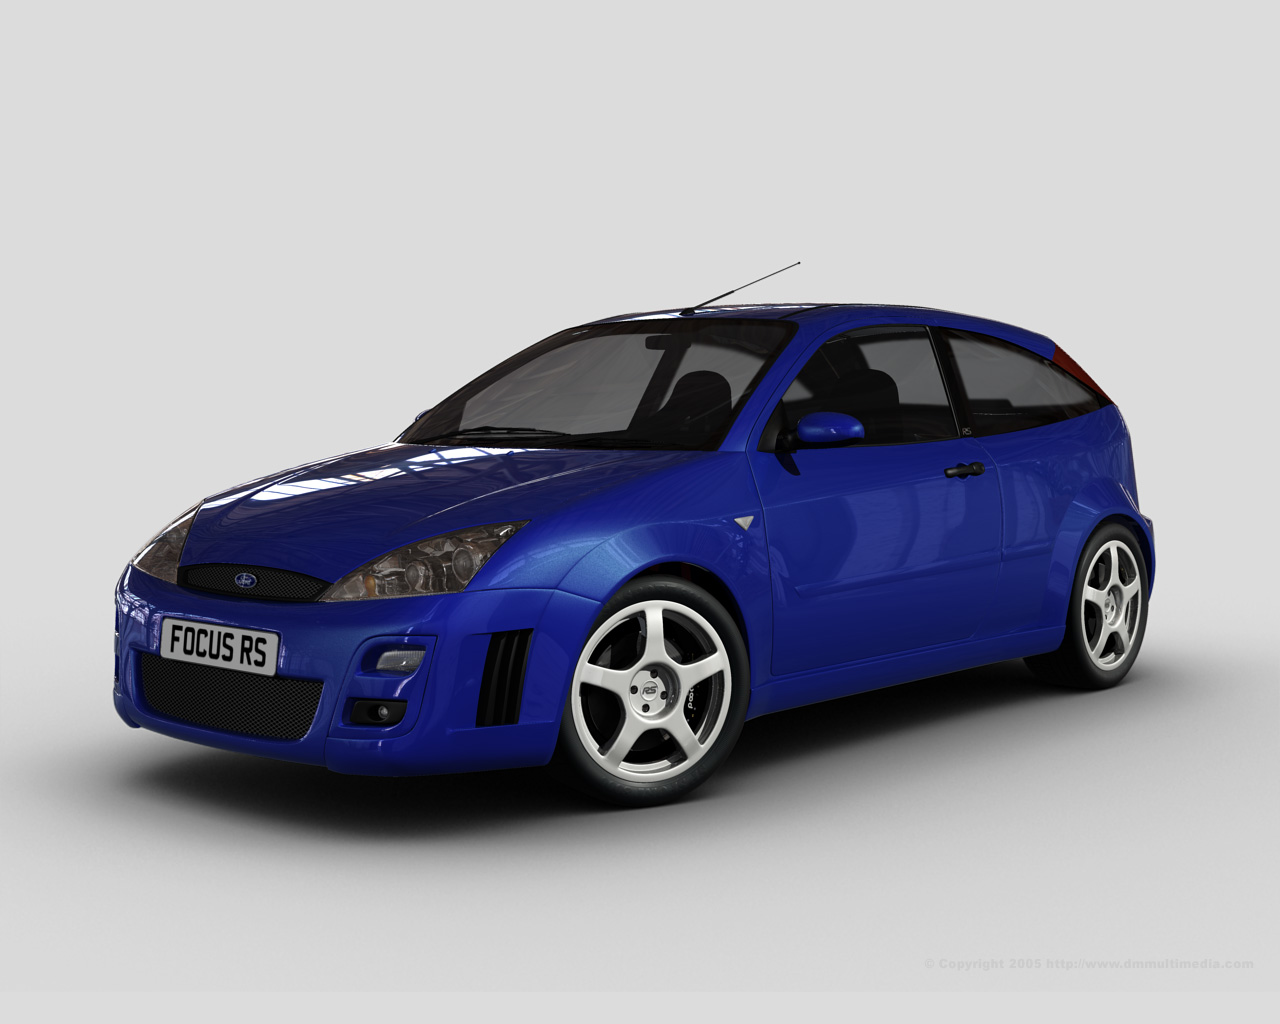 Focus RS in standard blue and OZ Alloys - this image is also available as a 